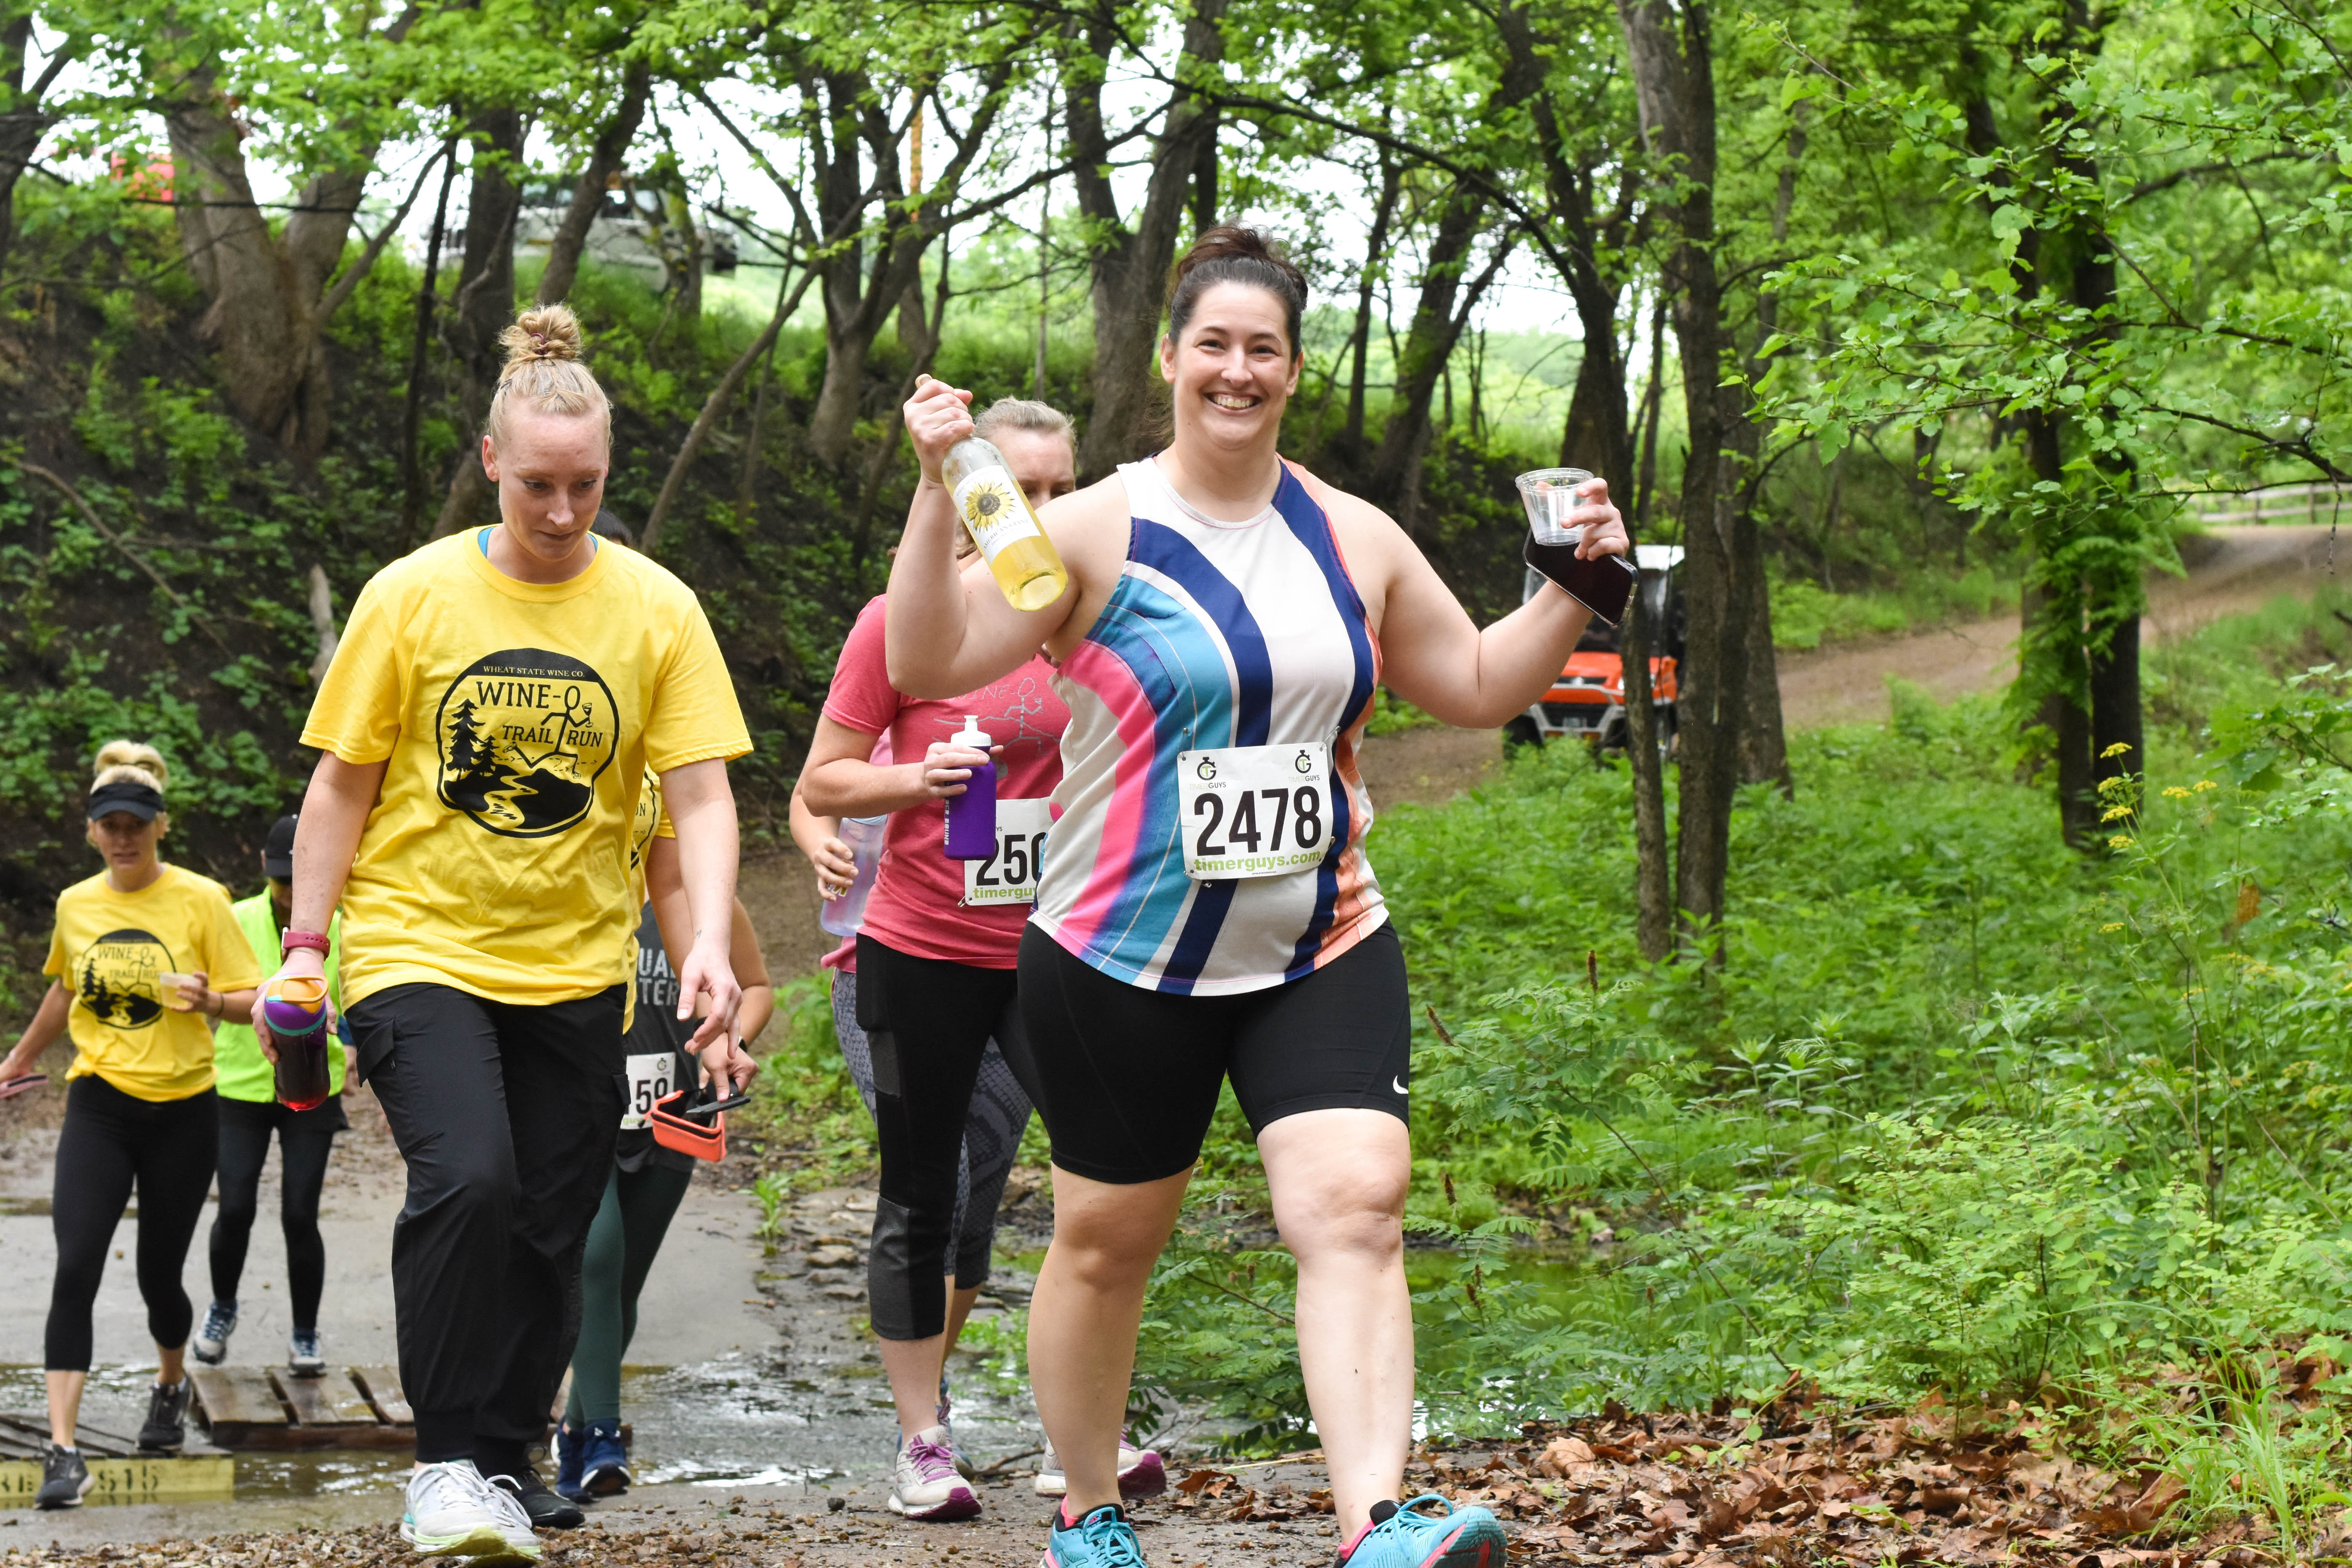 Participants traverse the trail at Wheat State Wine Co. in support of William Newton Hospital.